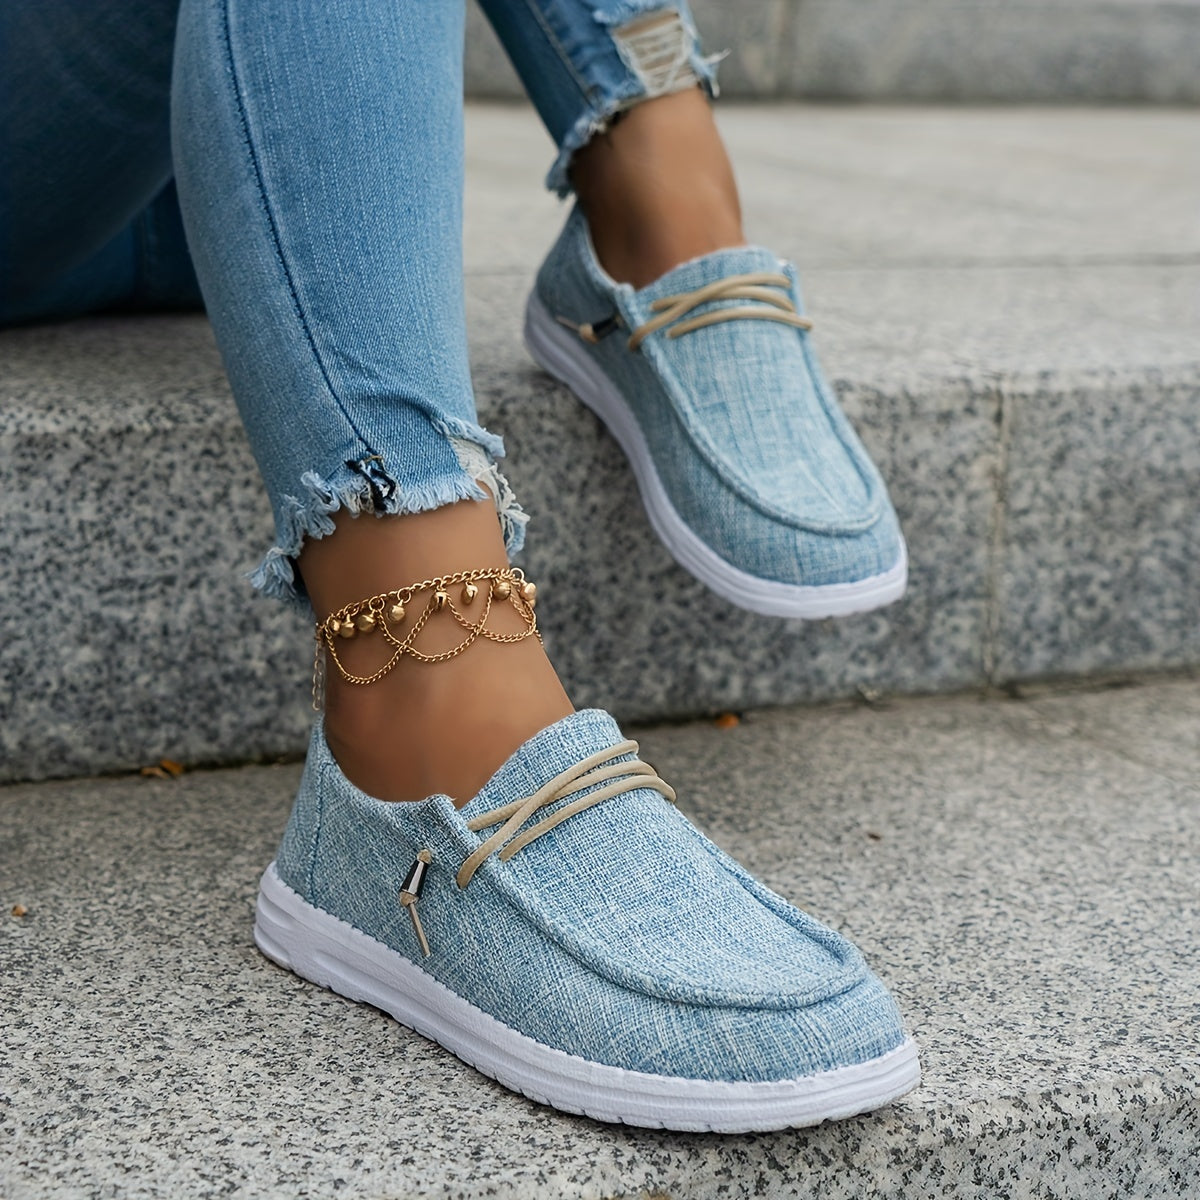 Solid Color Canvas Shoes, Casual Lace Up Sneakers